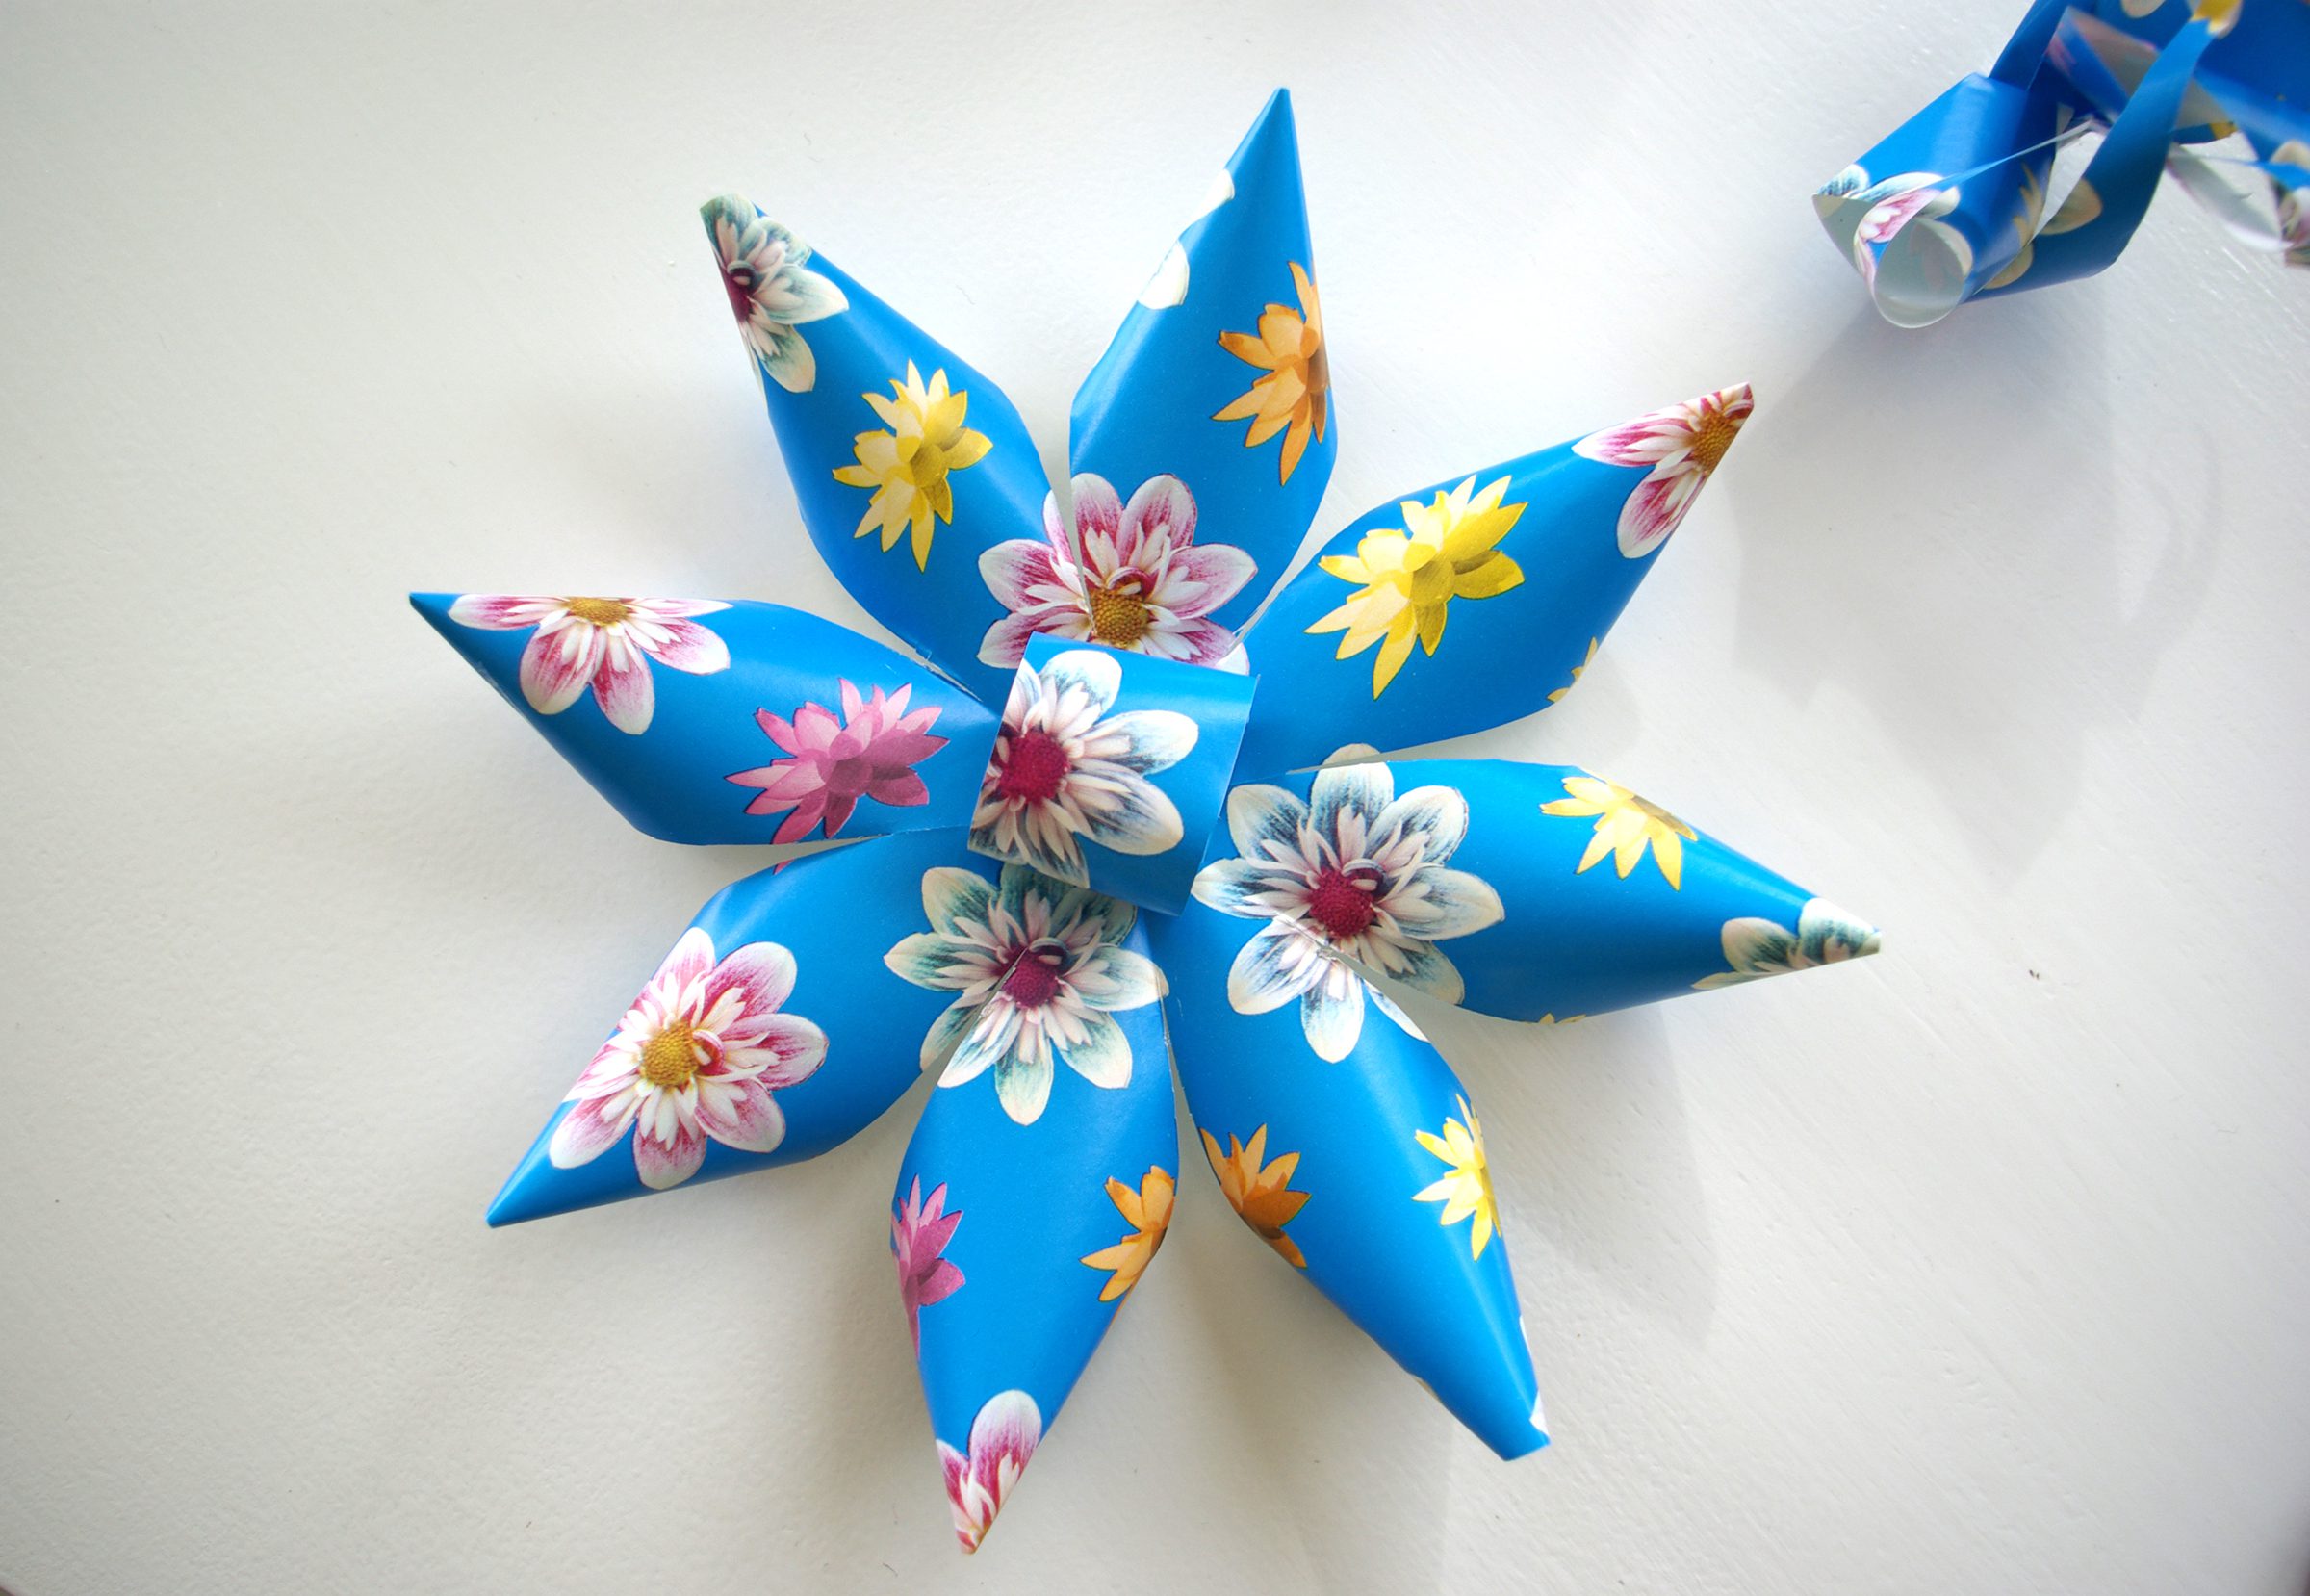 How To: Make Paper Flowers!